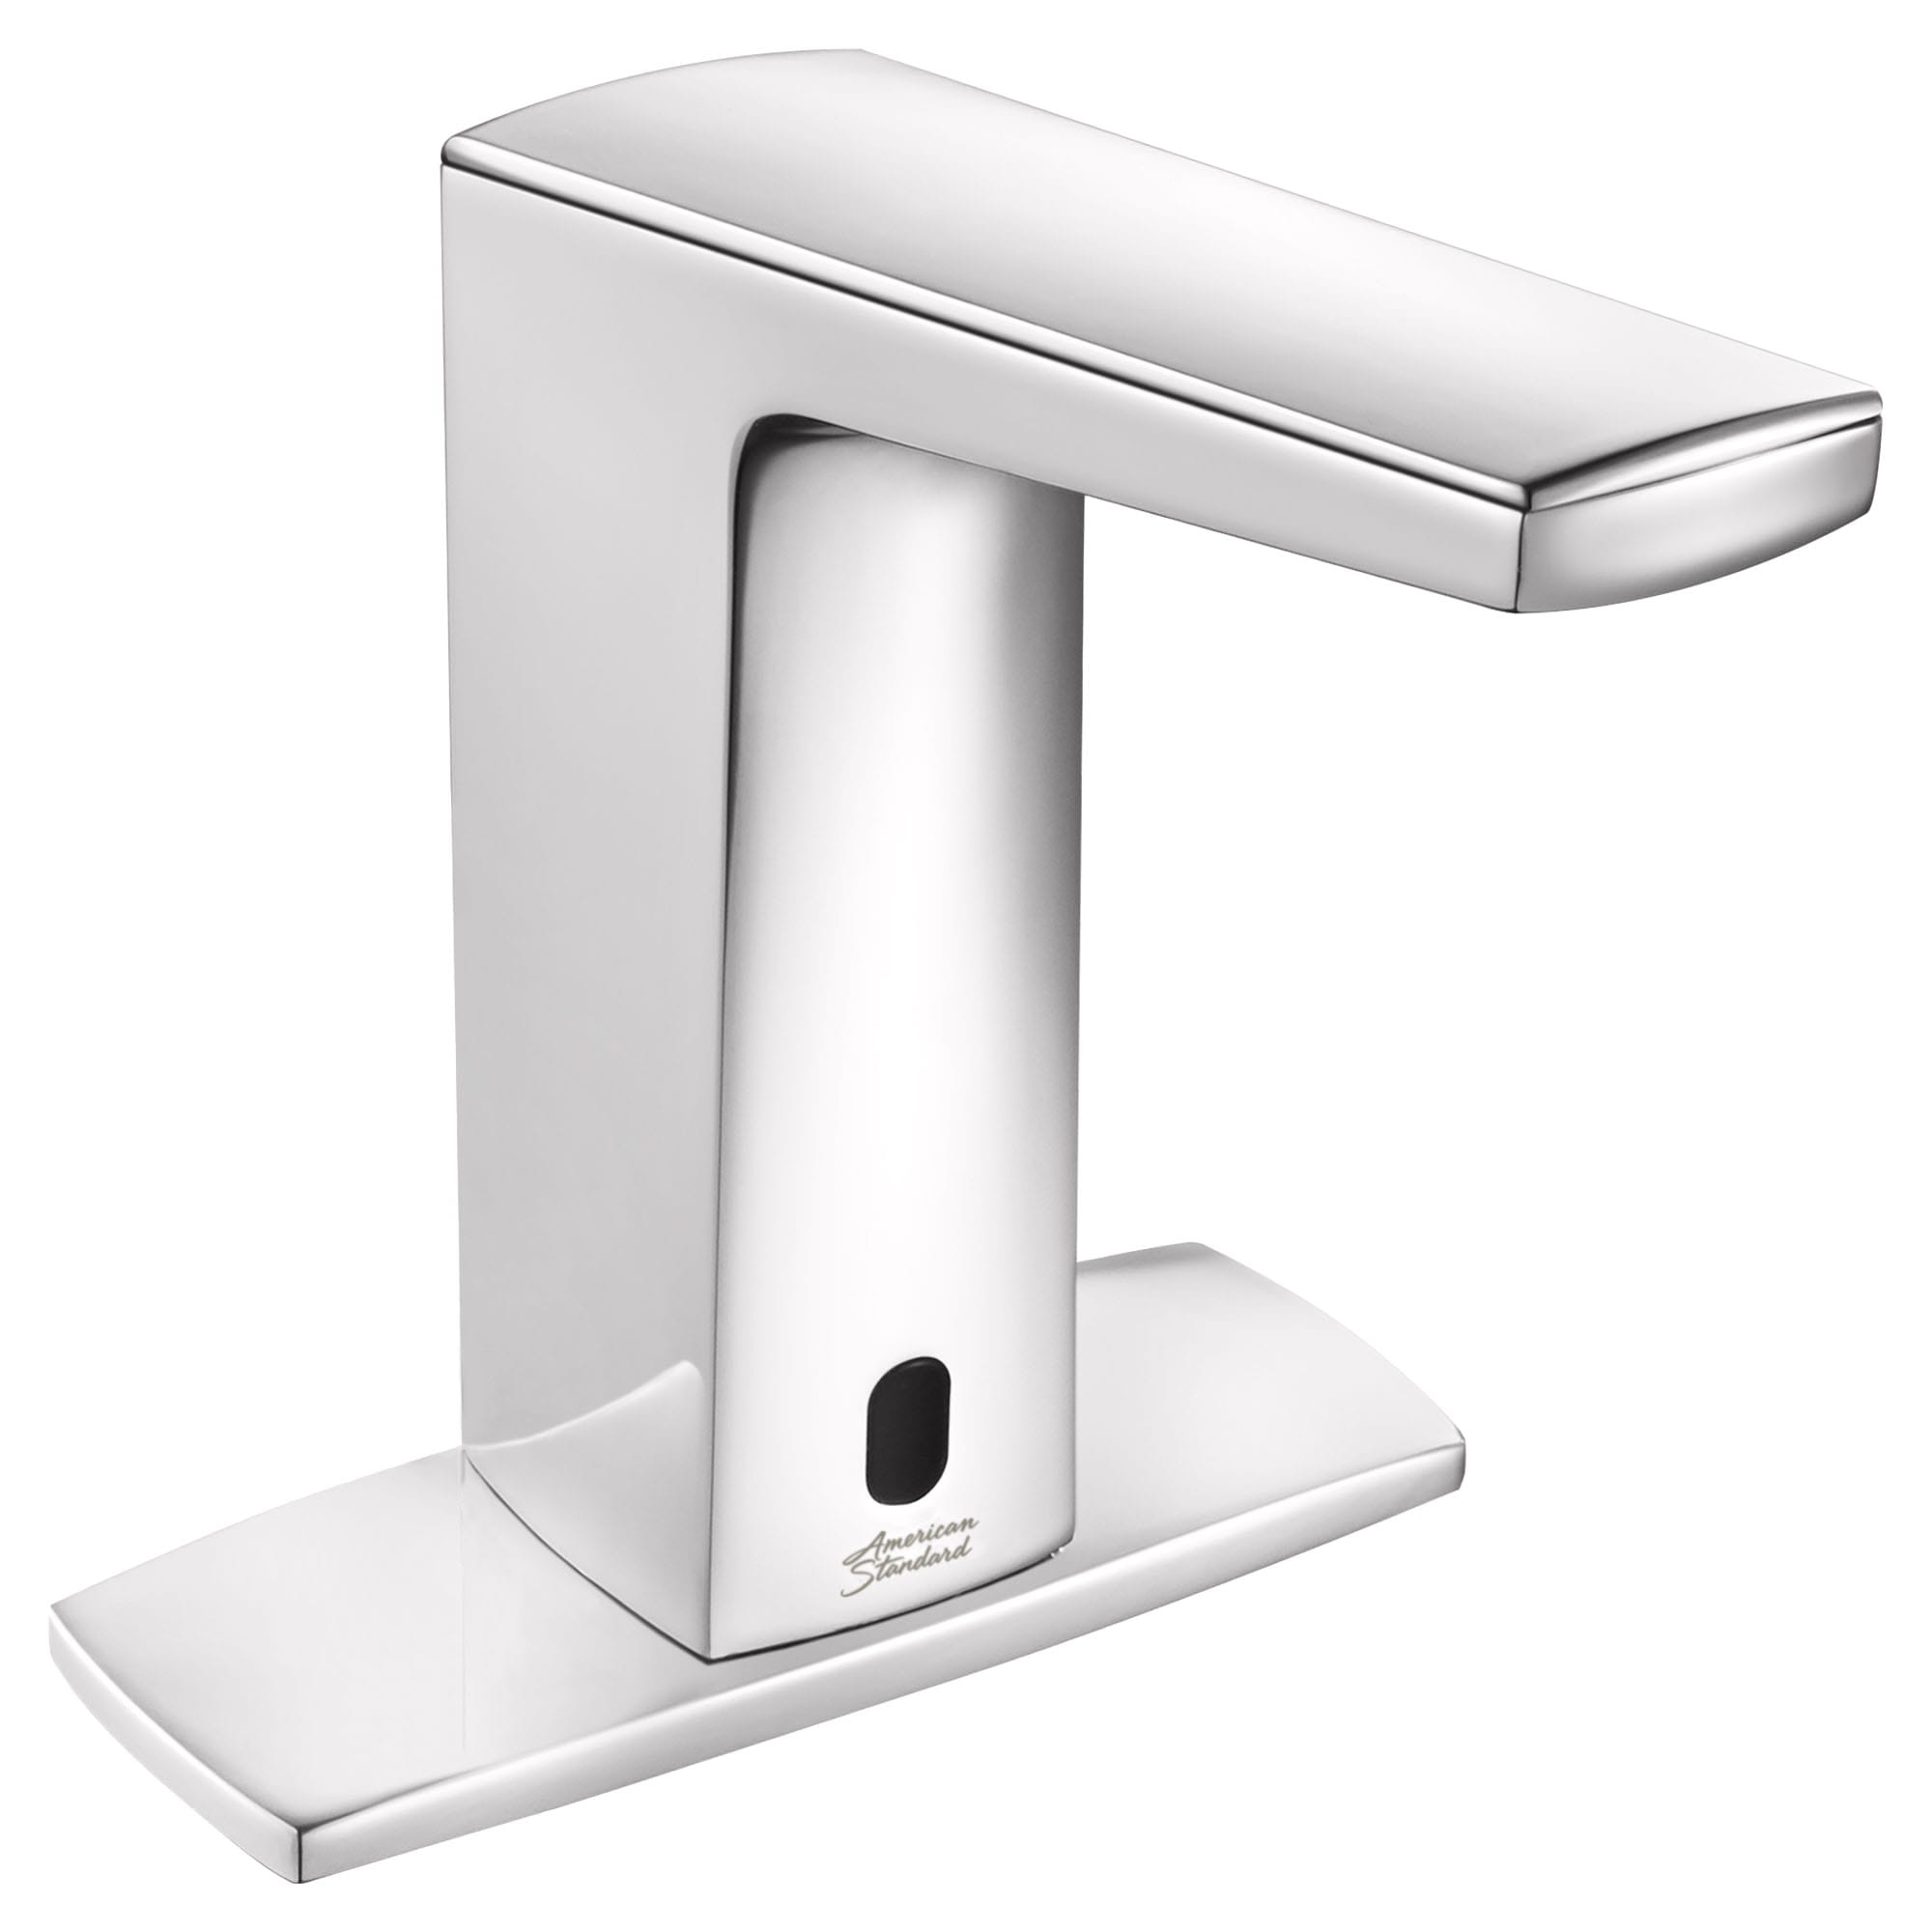 Paradigm® Selectronic® Touchless Faucet, Battery-Powered With Above-Deck Mixing, 0.5 gpm/1.9 Lpm